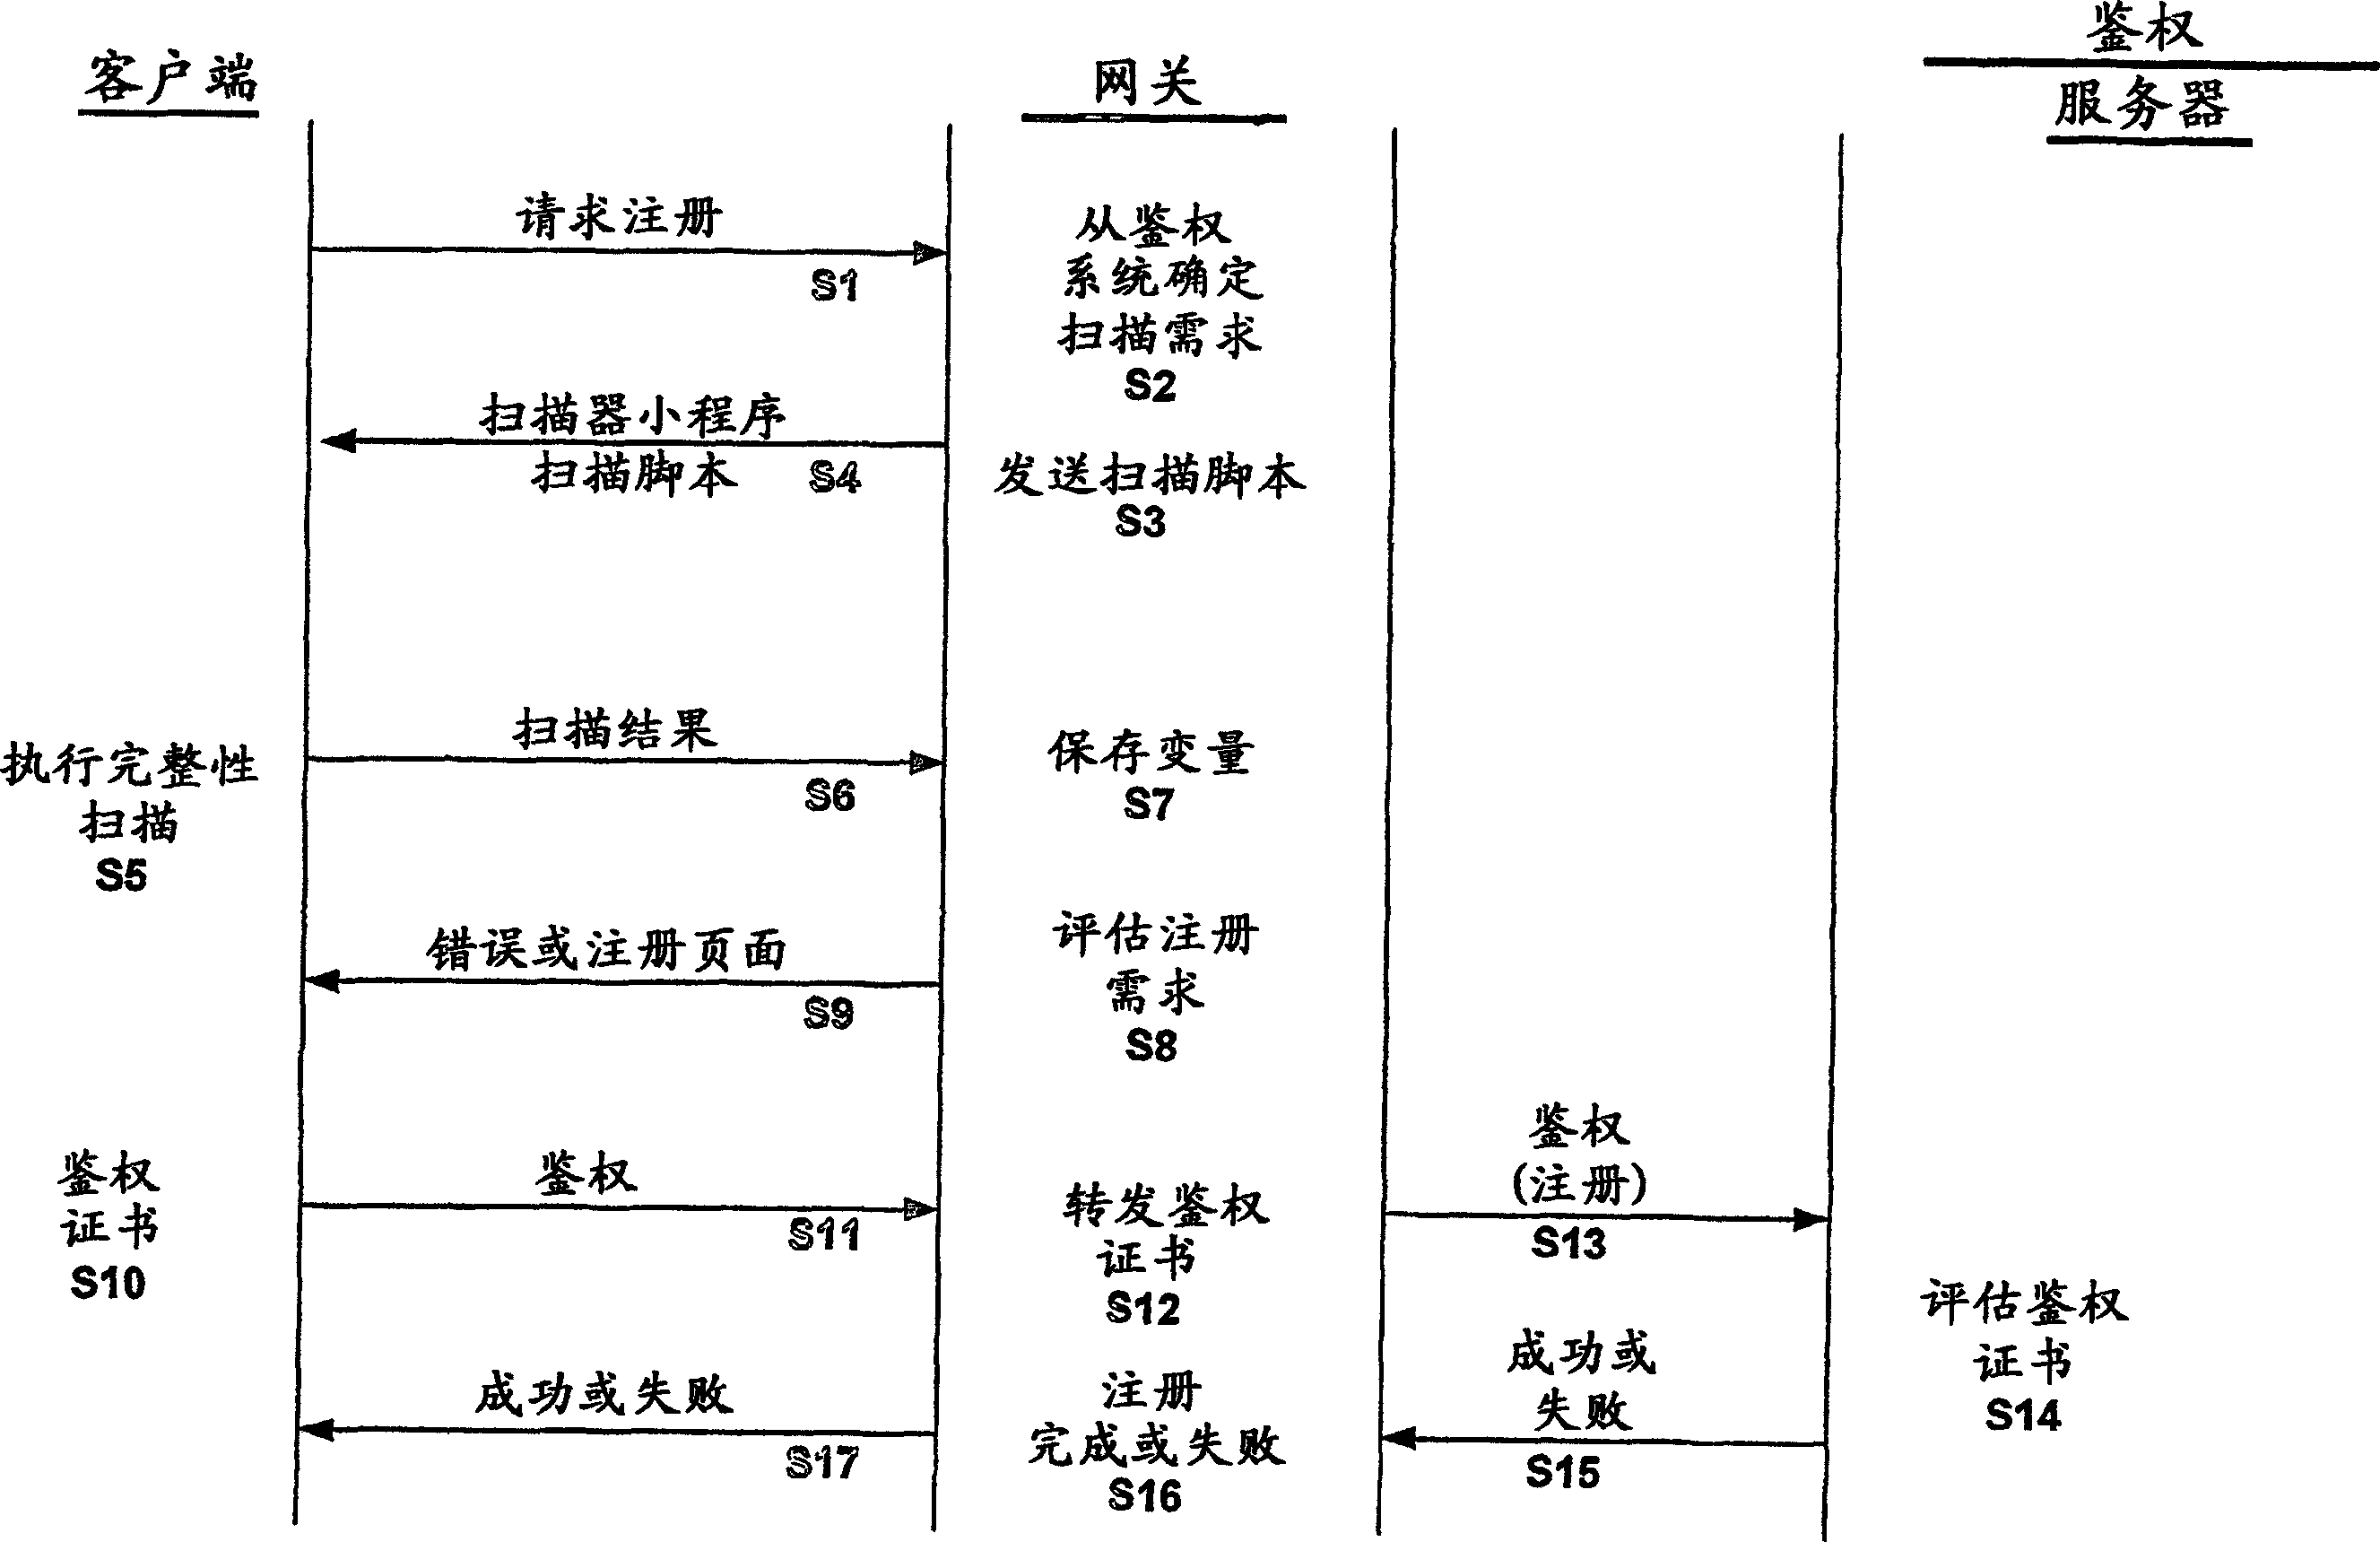 An apparatus, system, method and computer program product for implementing remote client integrity verification